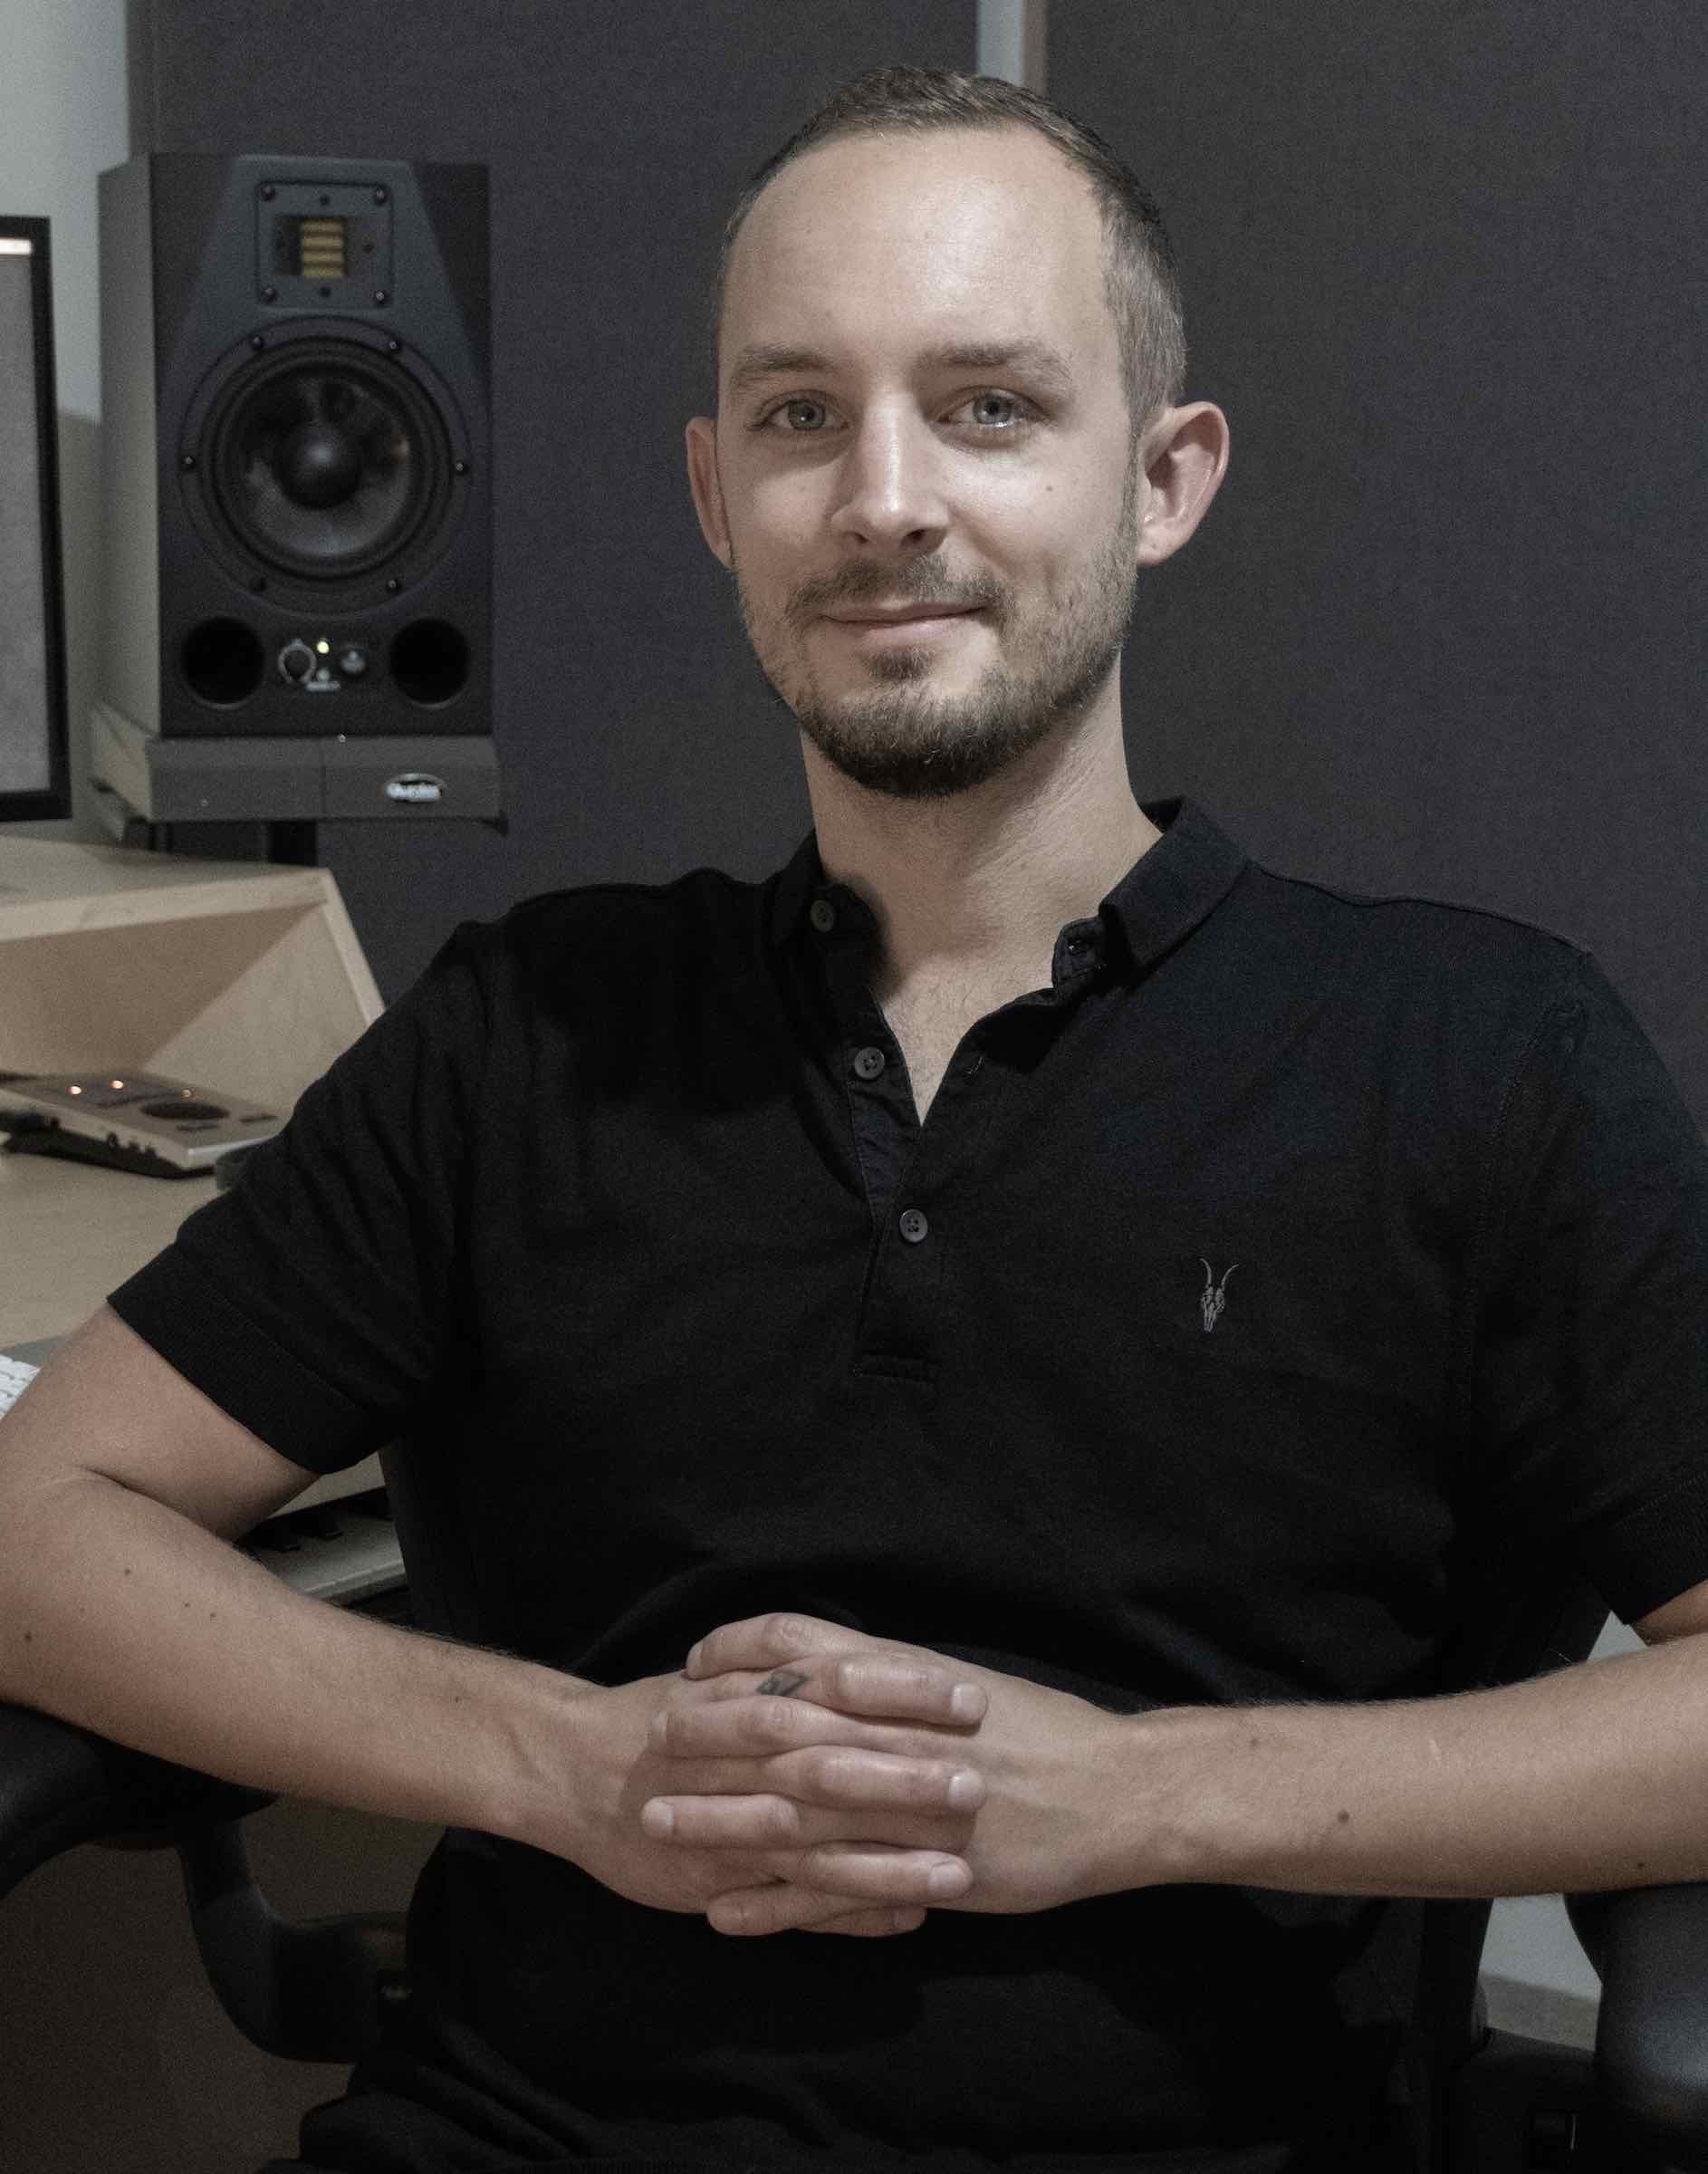 Sam Wale taps an extensive background and keen vision while overseeing the production of every album from concept stage to mastering and final release.